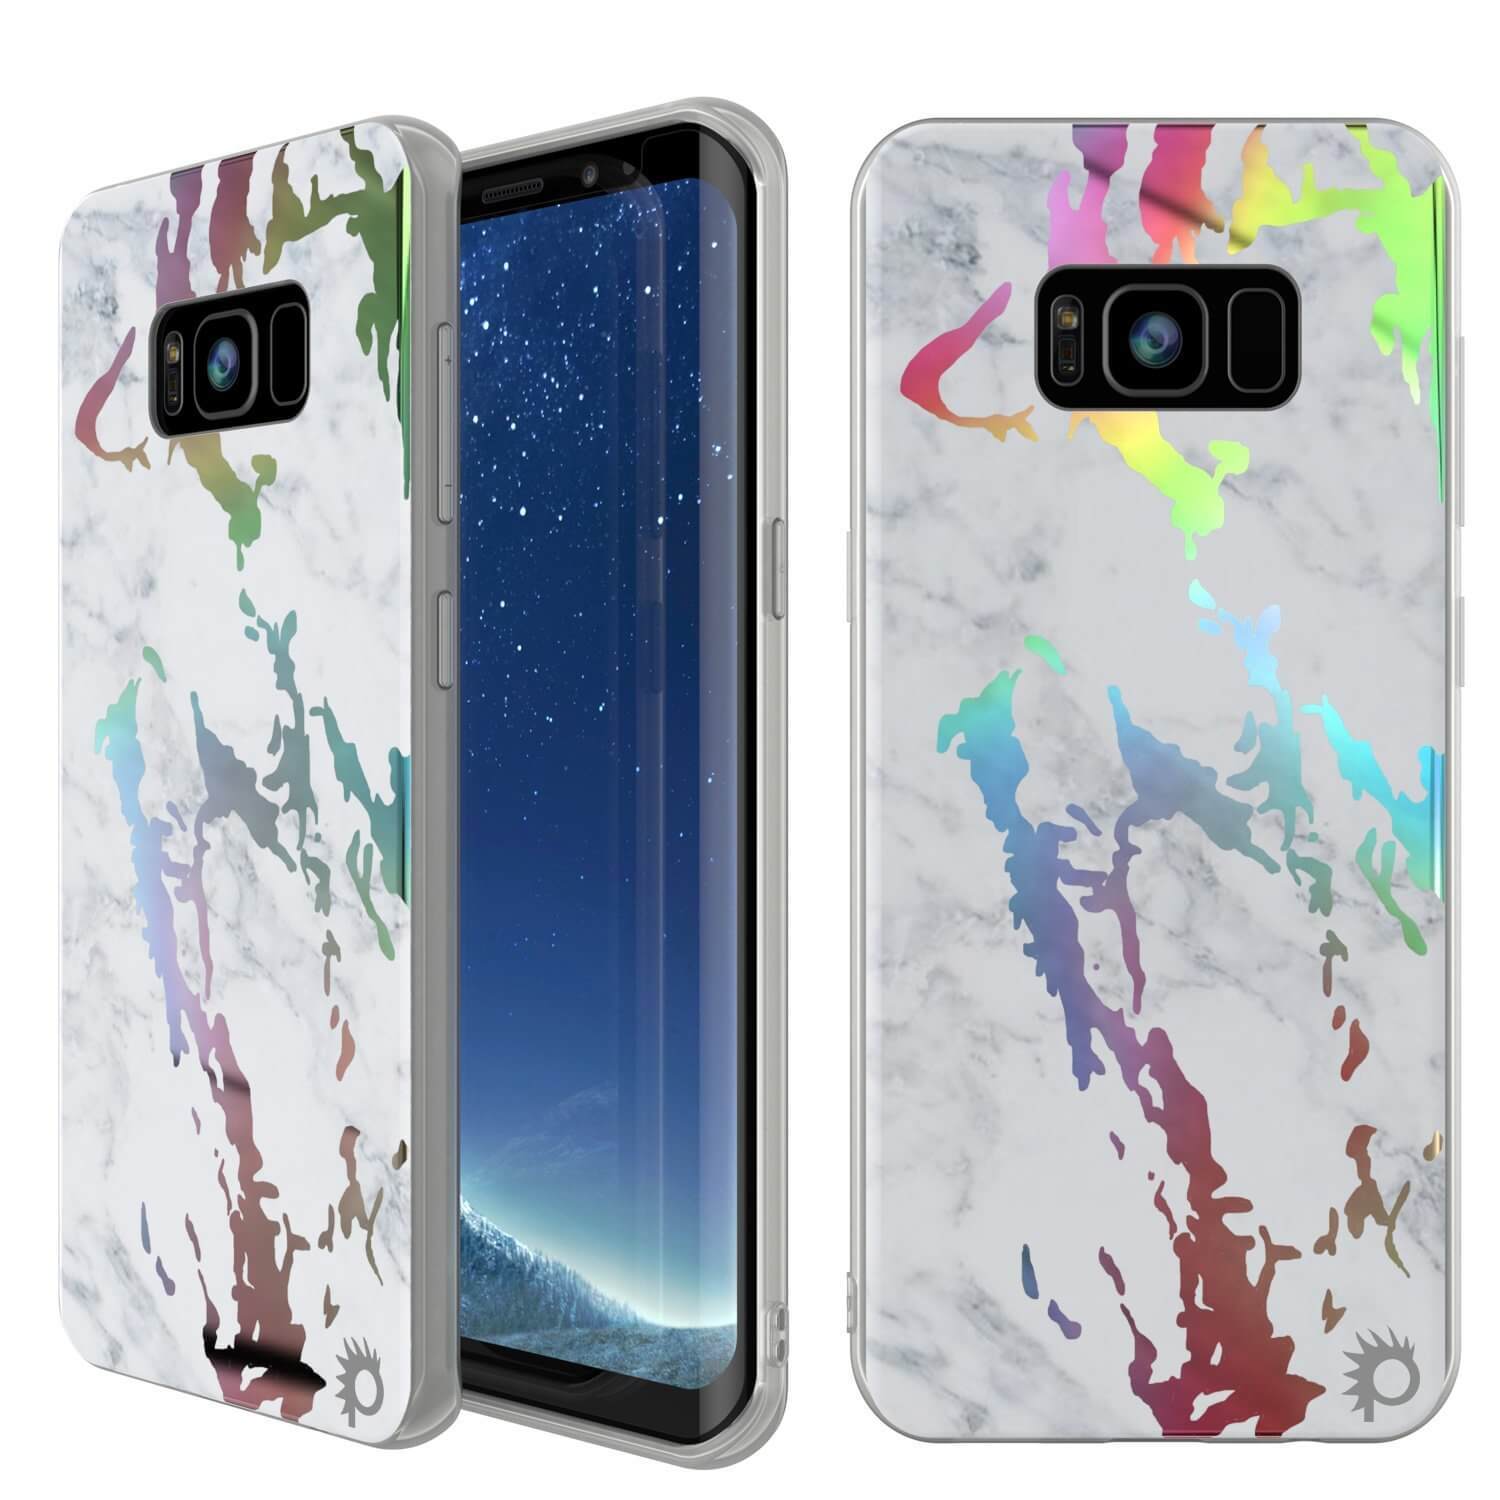 Galaxy S8 Plus Marble Case Protective Full Body Cover[Blanco Marmo]